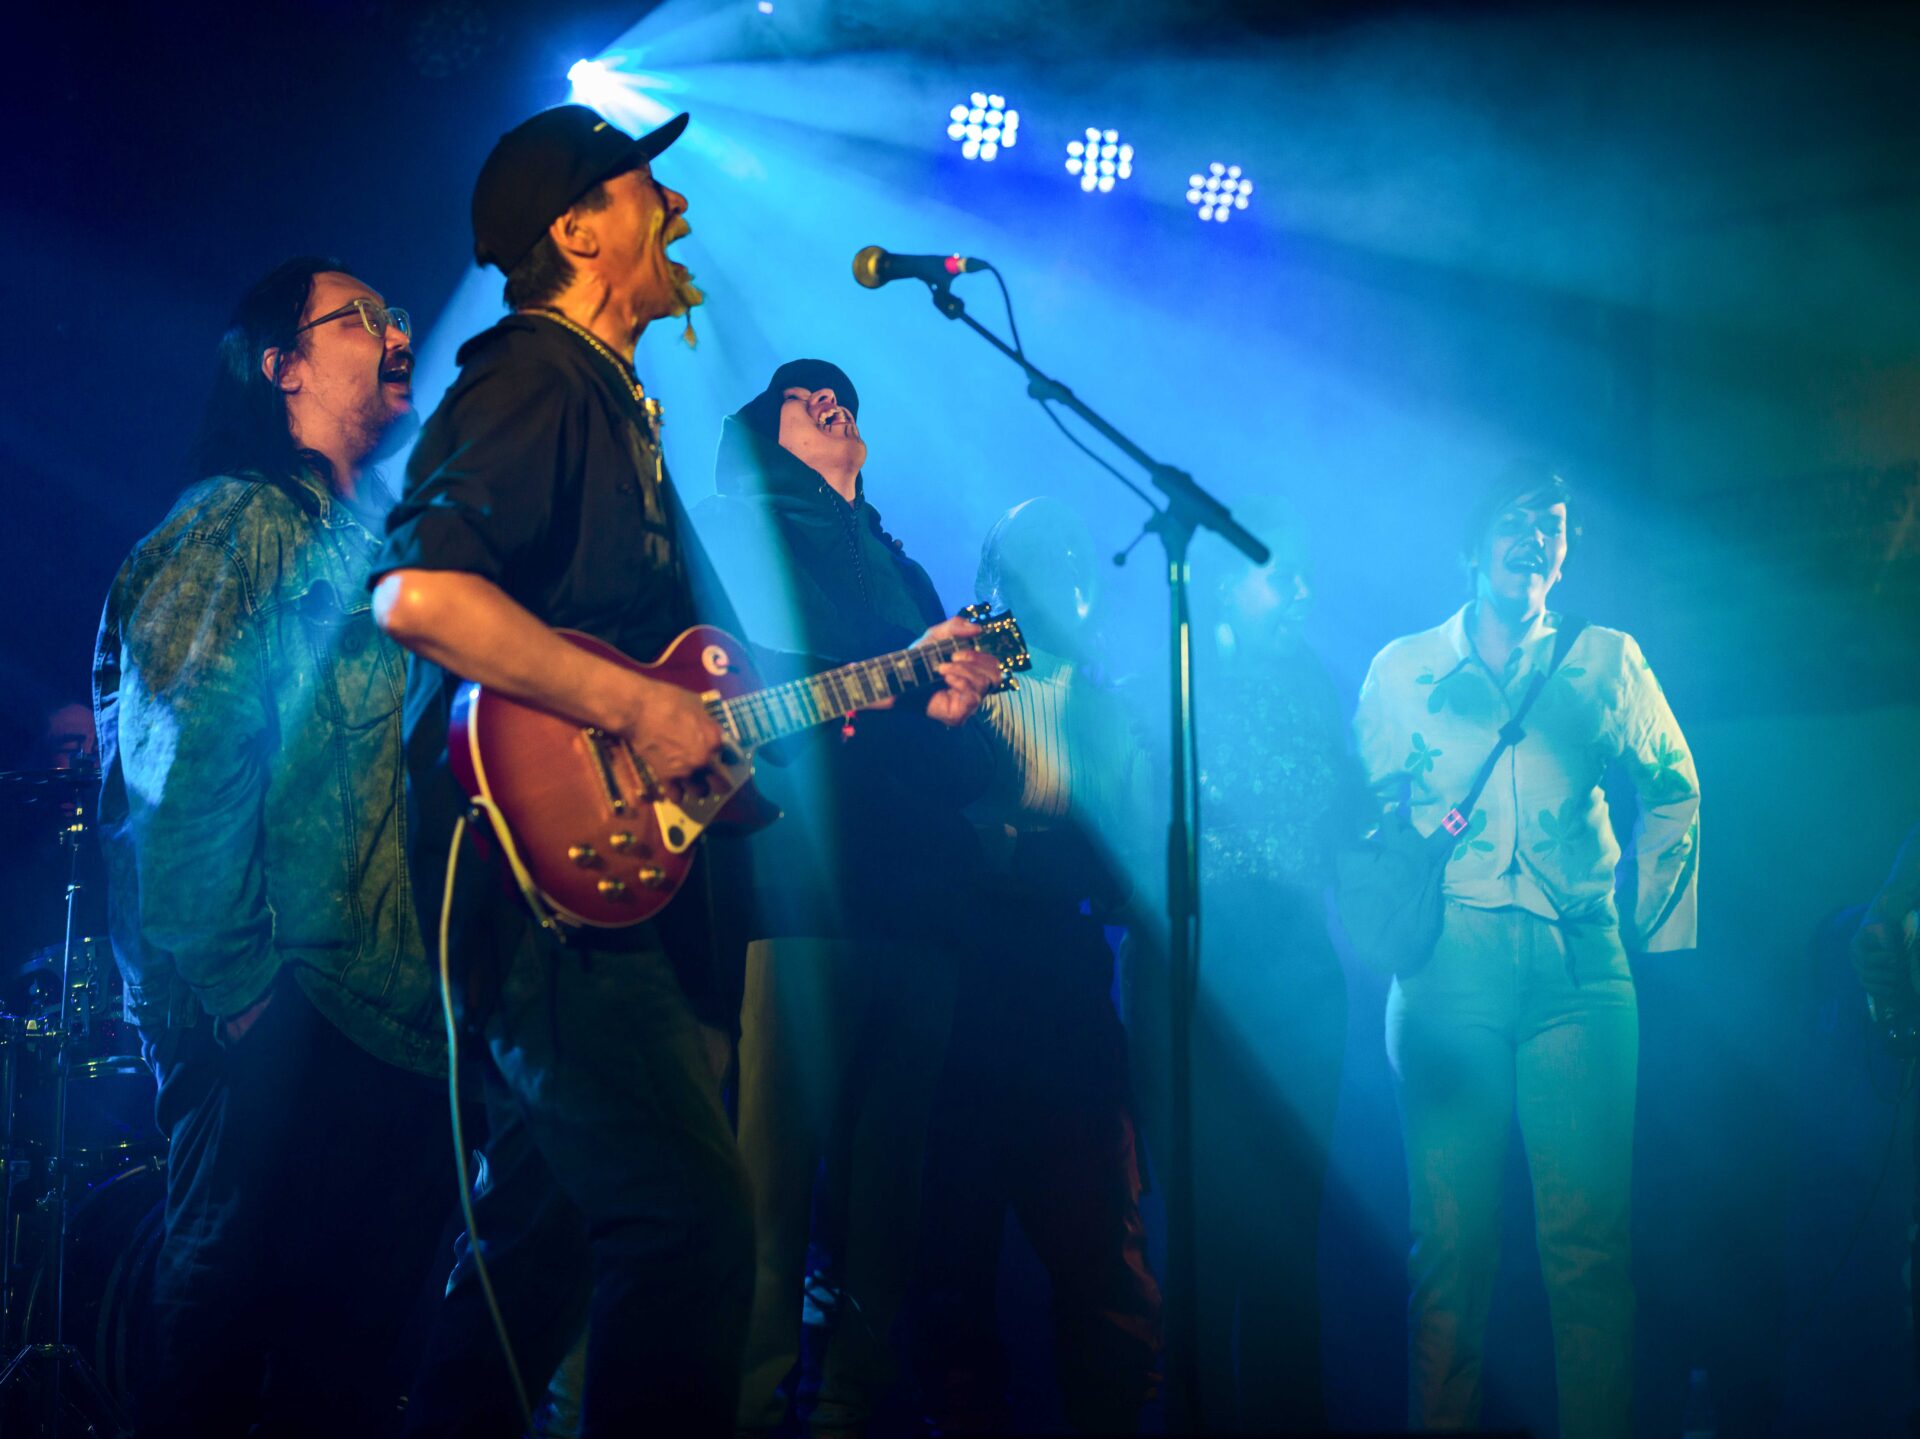 Four singing musicians in hoodies and denim jackets stand backlit with blue and white stage lights before a microphone, mouths open in song.